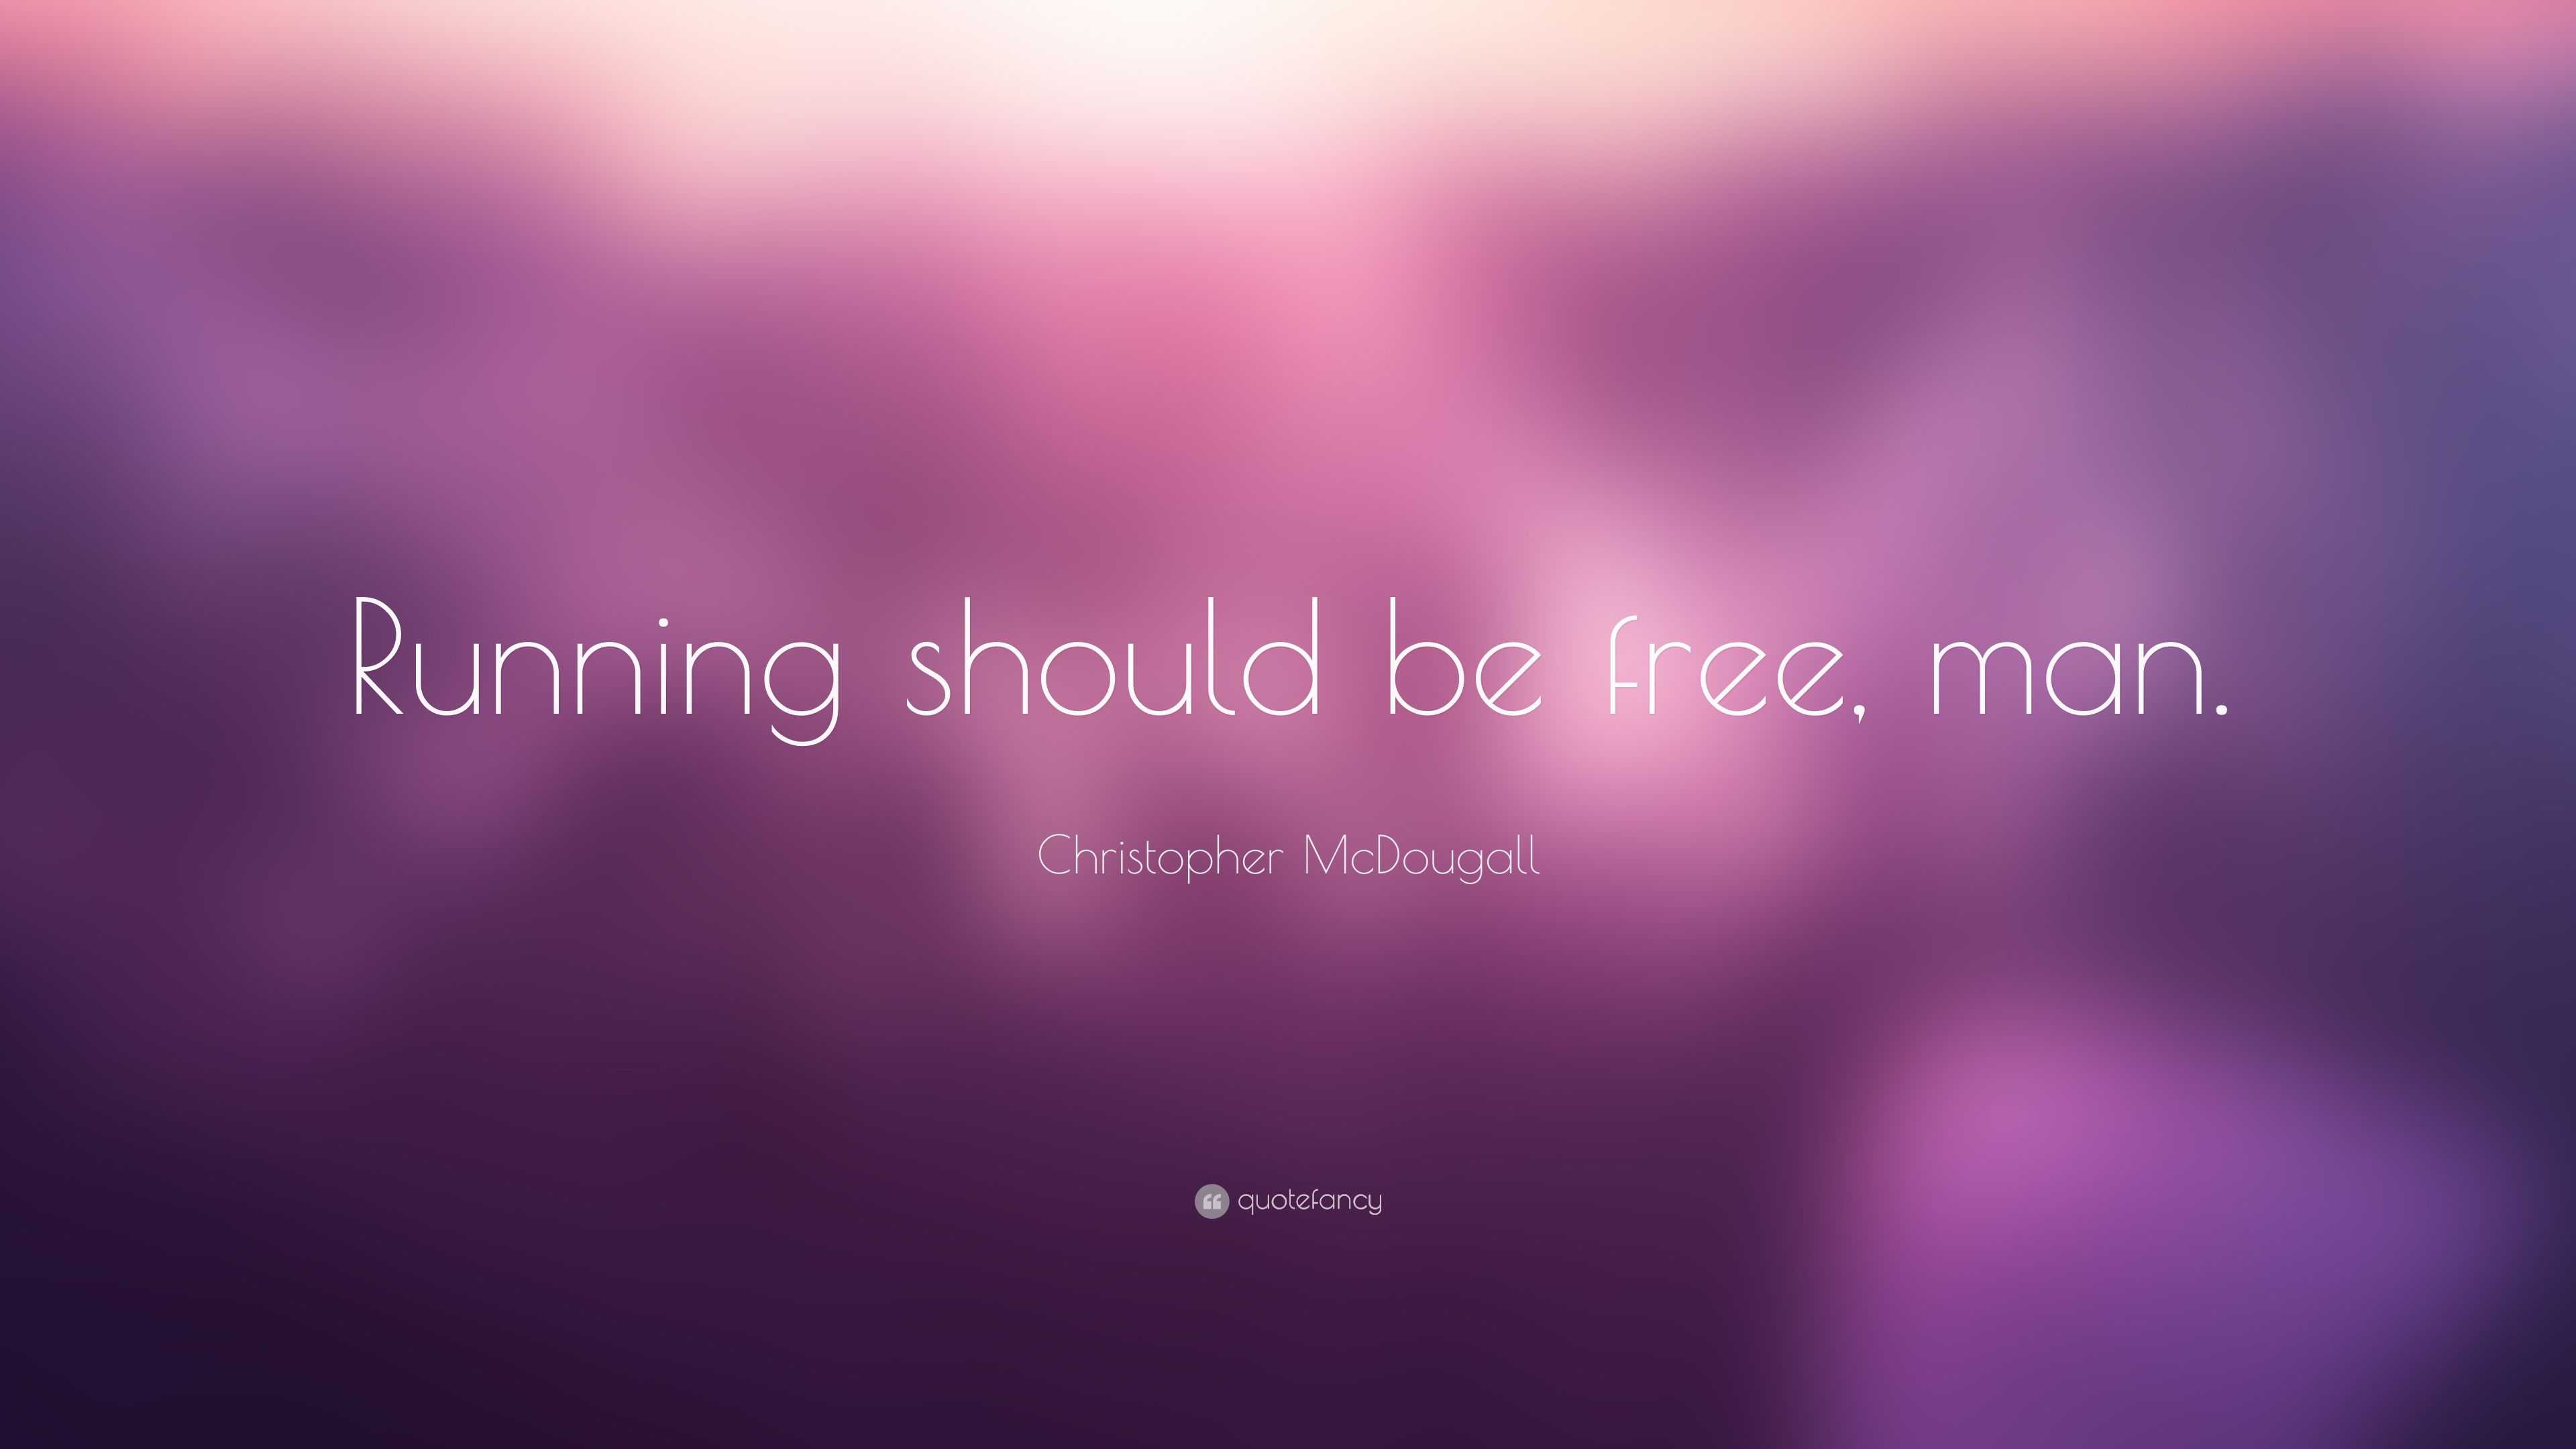 Christopher McDougall Quote: “Running should be free, man.” (7